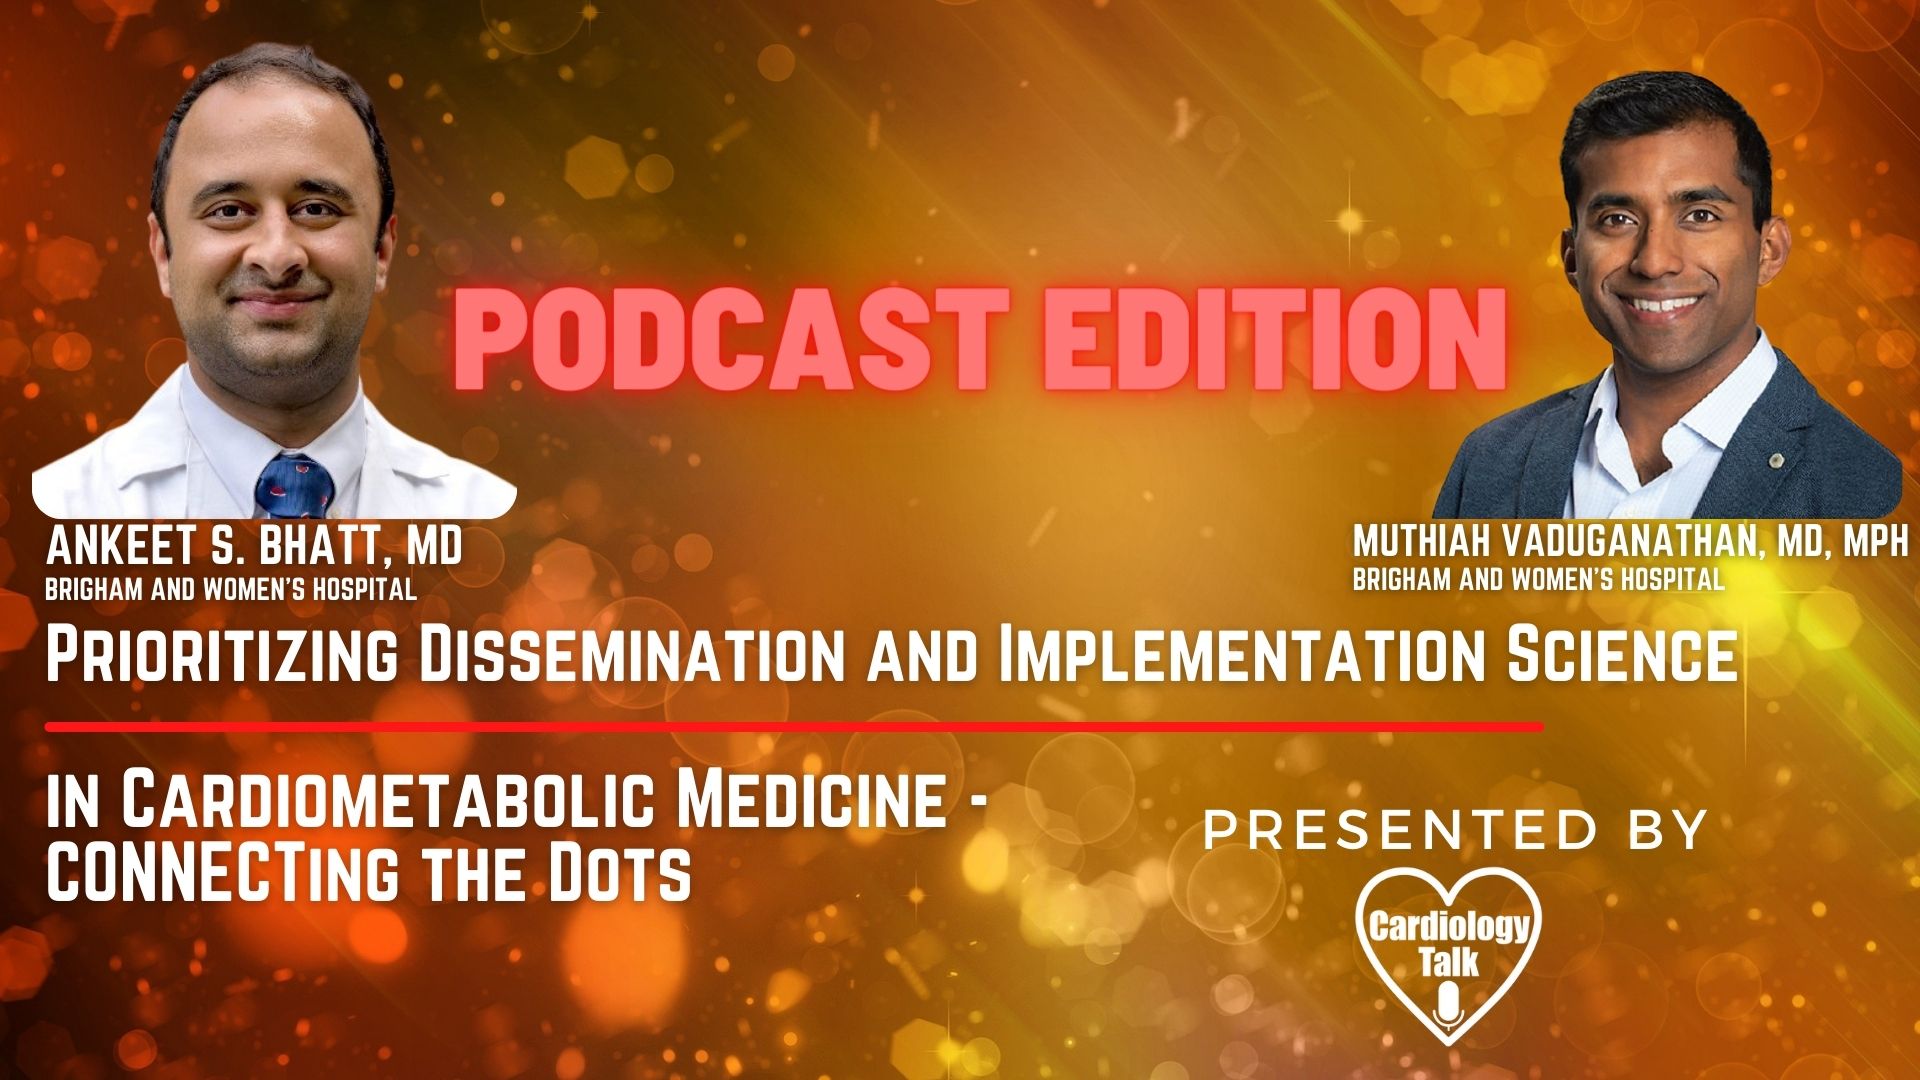 Podcast - Ankeet S. Bhatt, MD and Muthiah Vaduganathan, MD @ankeetbhatt @mvaduganathan @BrighamCVFellows @bwhcvls @BrighamResearch #CONNECTHF #HeartFailure #Cardiology #Research Cardiomet...